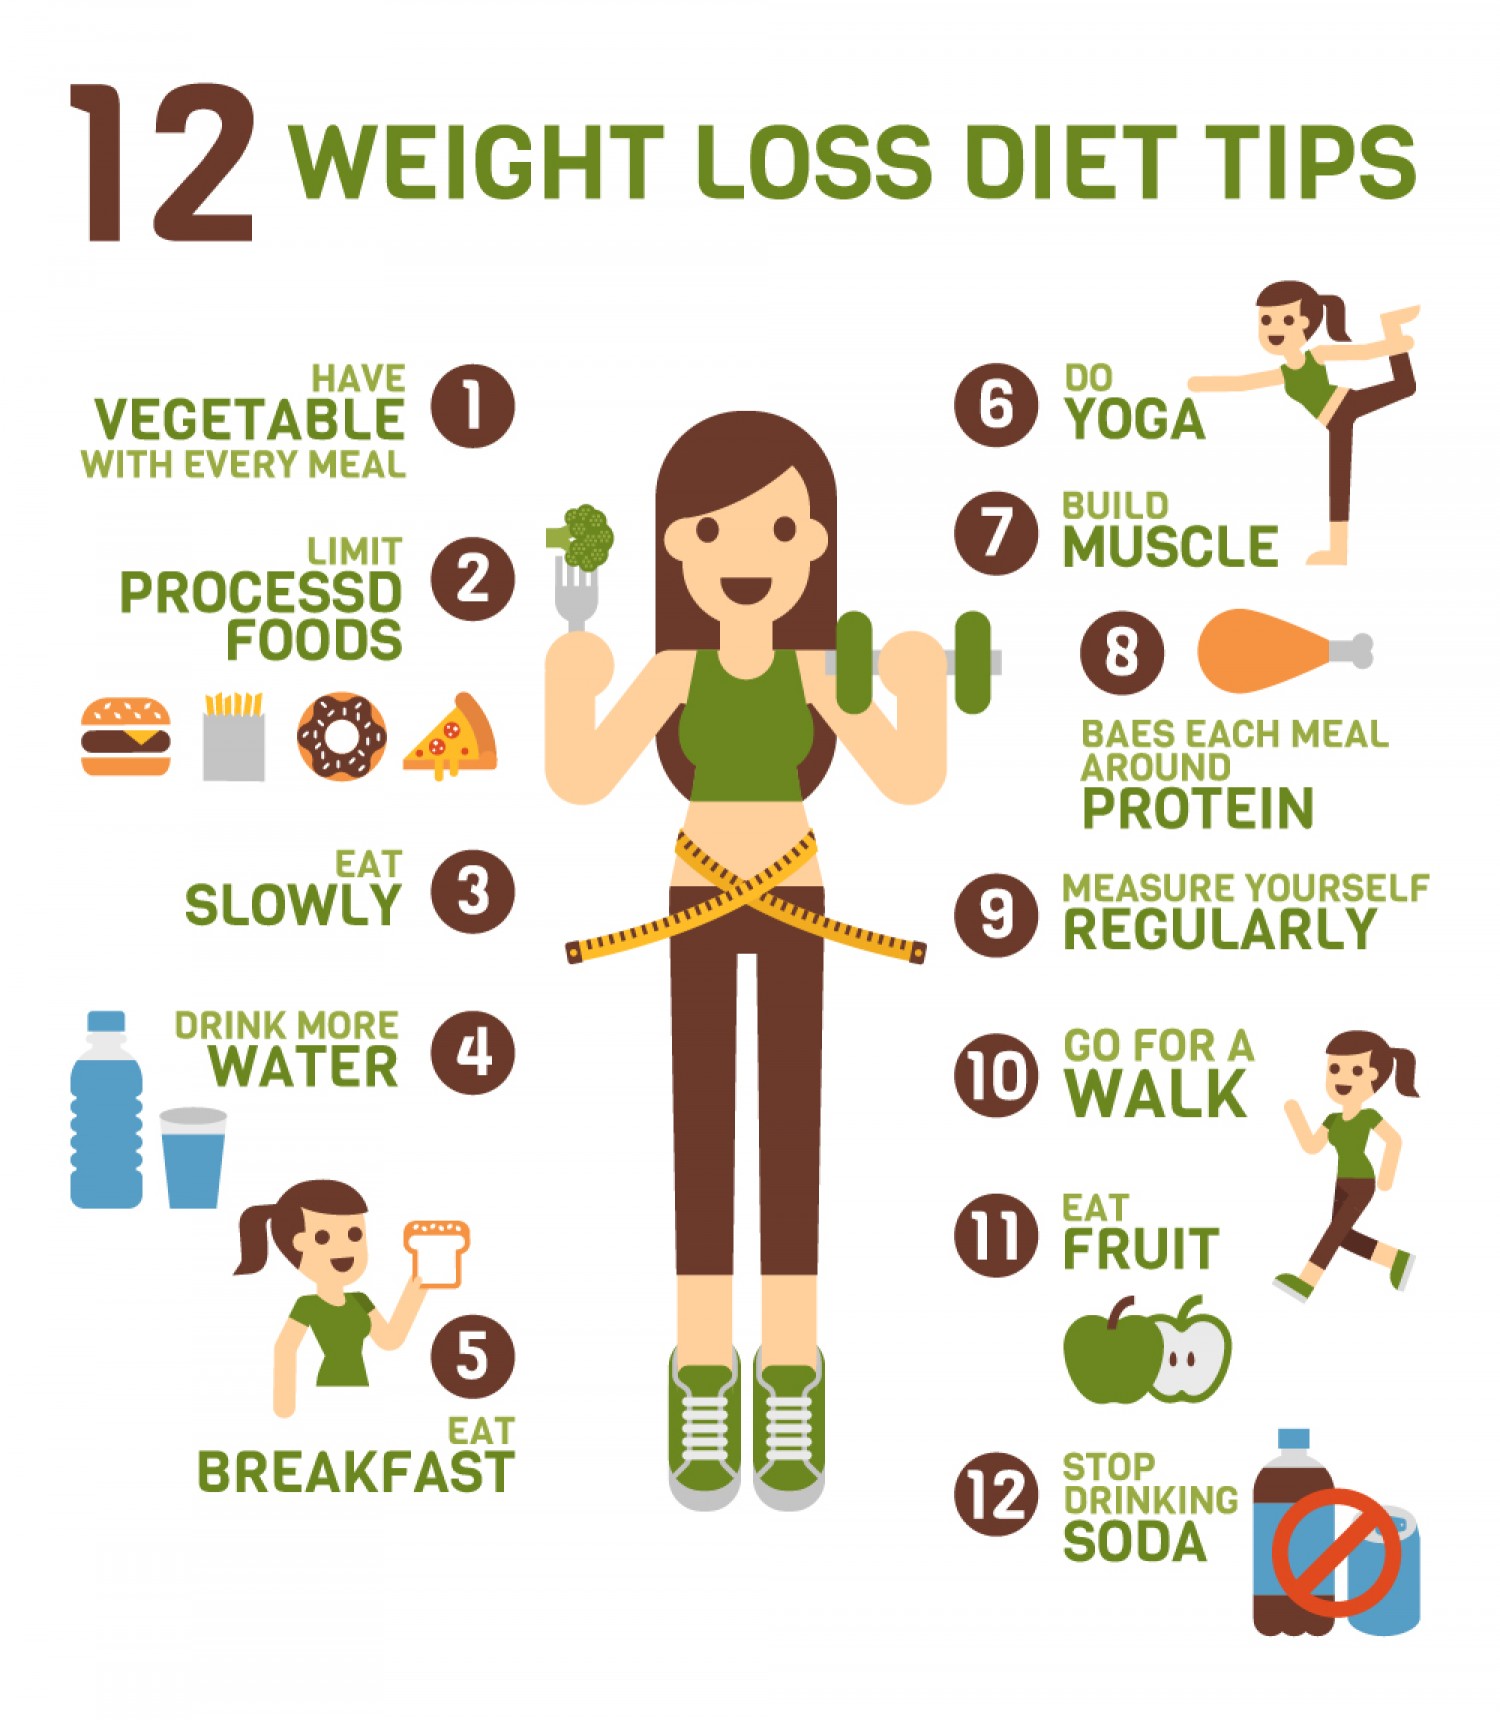 12 weight loss diet tips